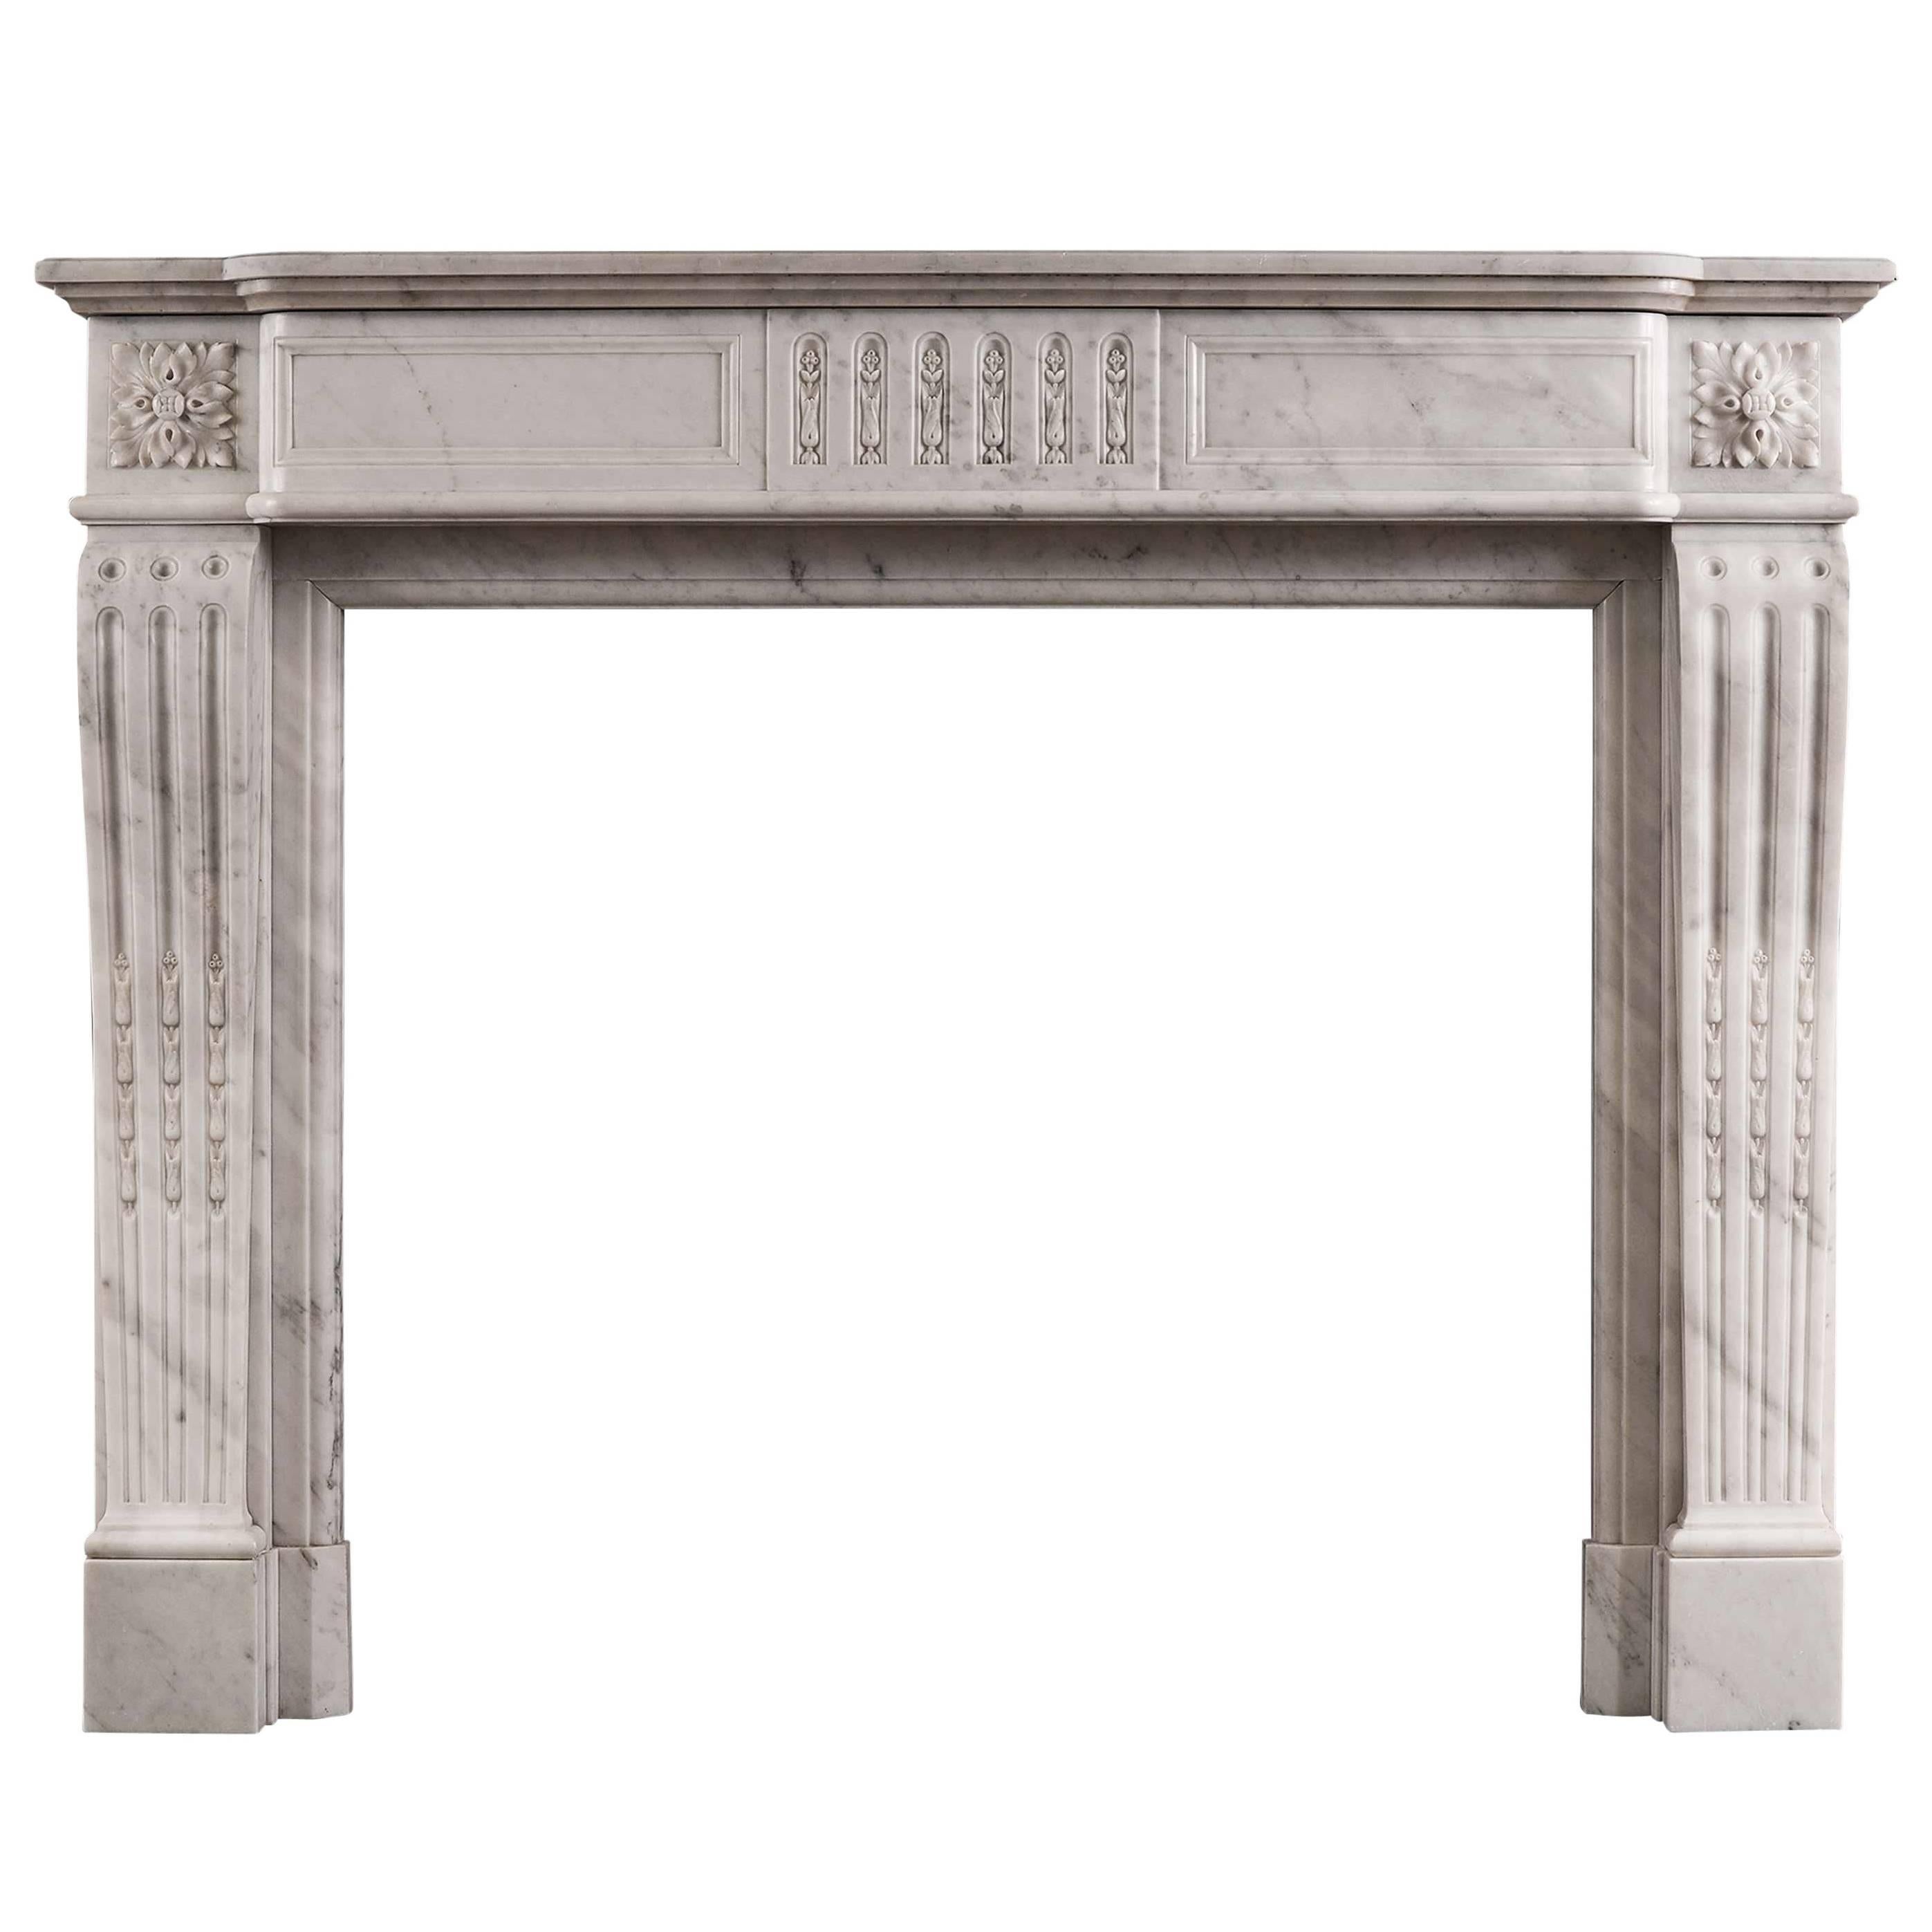 Louis XVI Style Fireplace in Carrara Marble For Sale